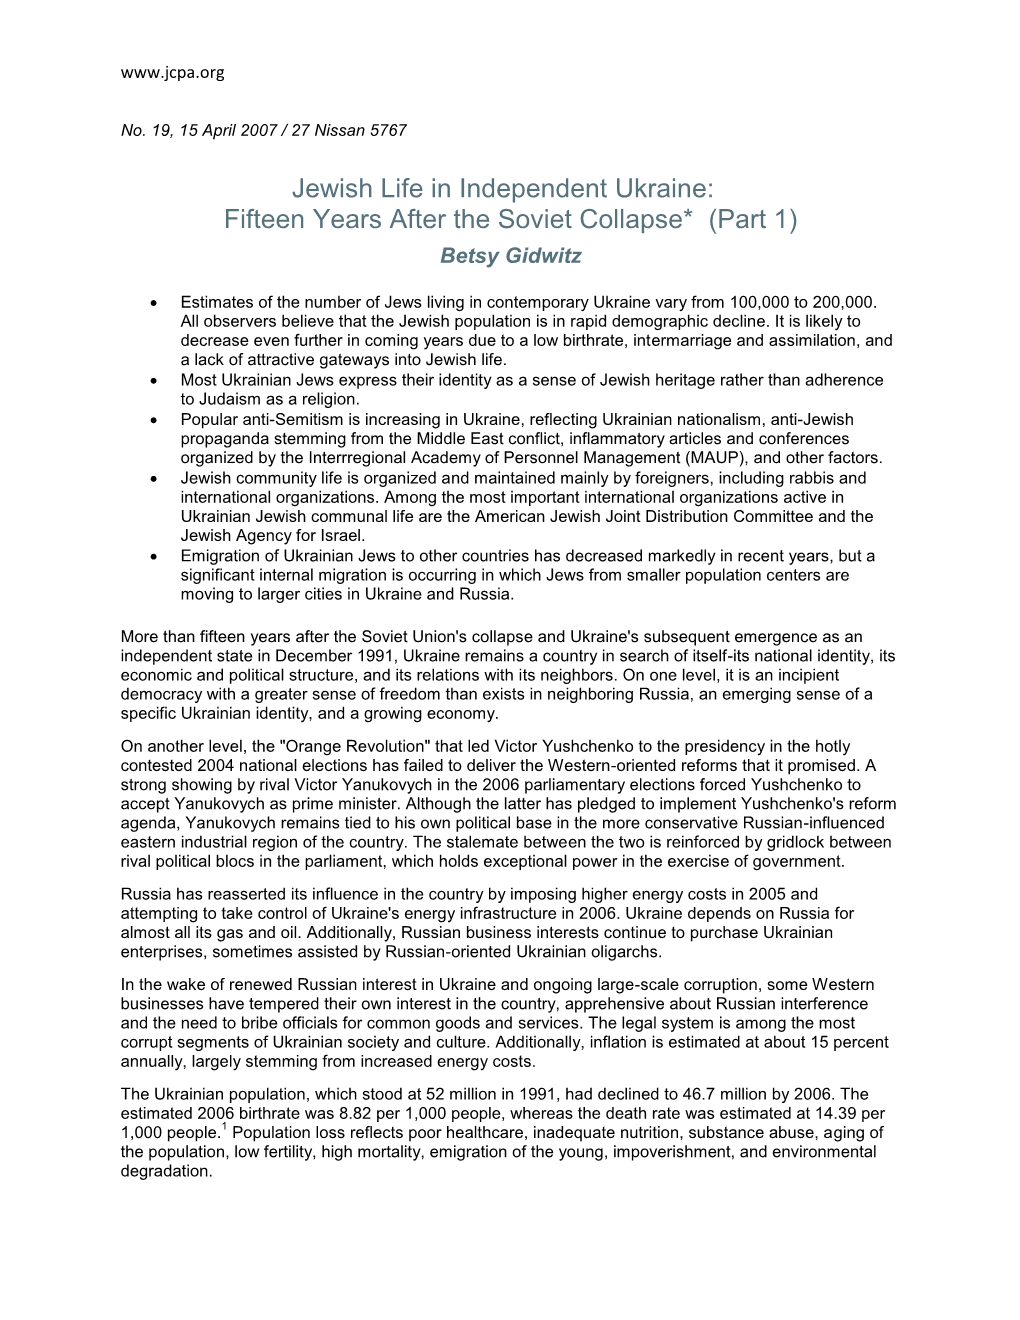 Jewish Life in Independent Ukraine: Fifteen Years After the Soviet Collapse* (Part 1) Betsy Gidwitz